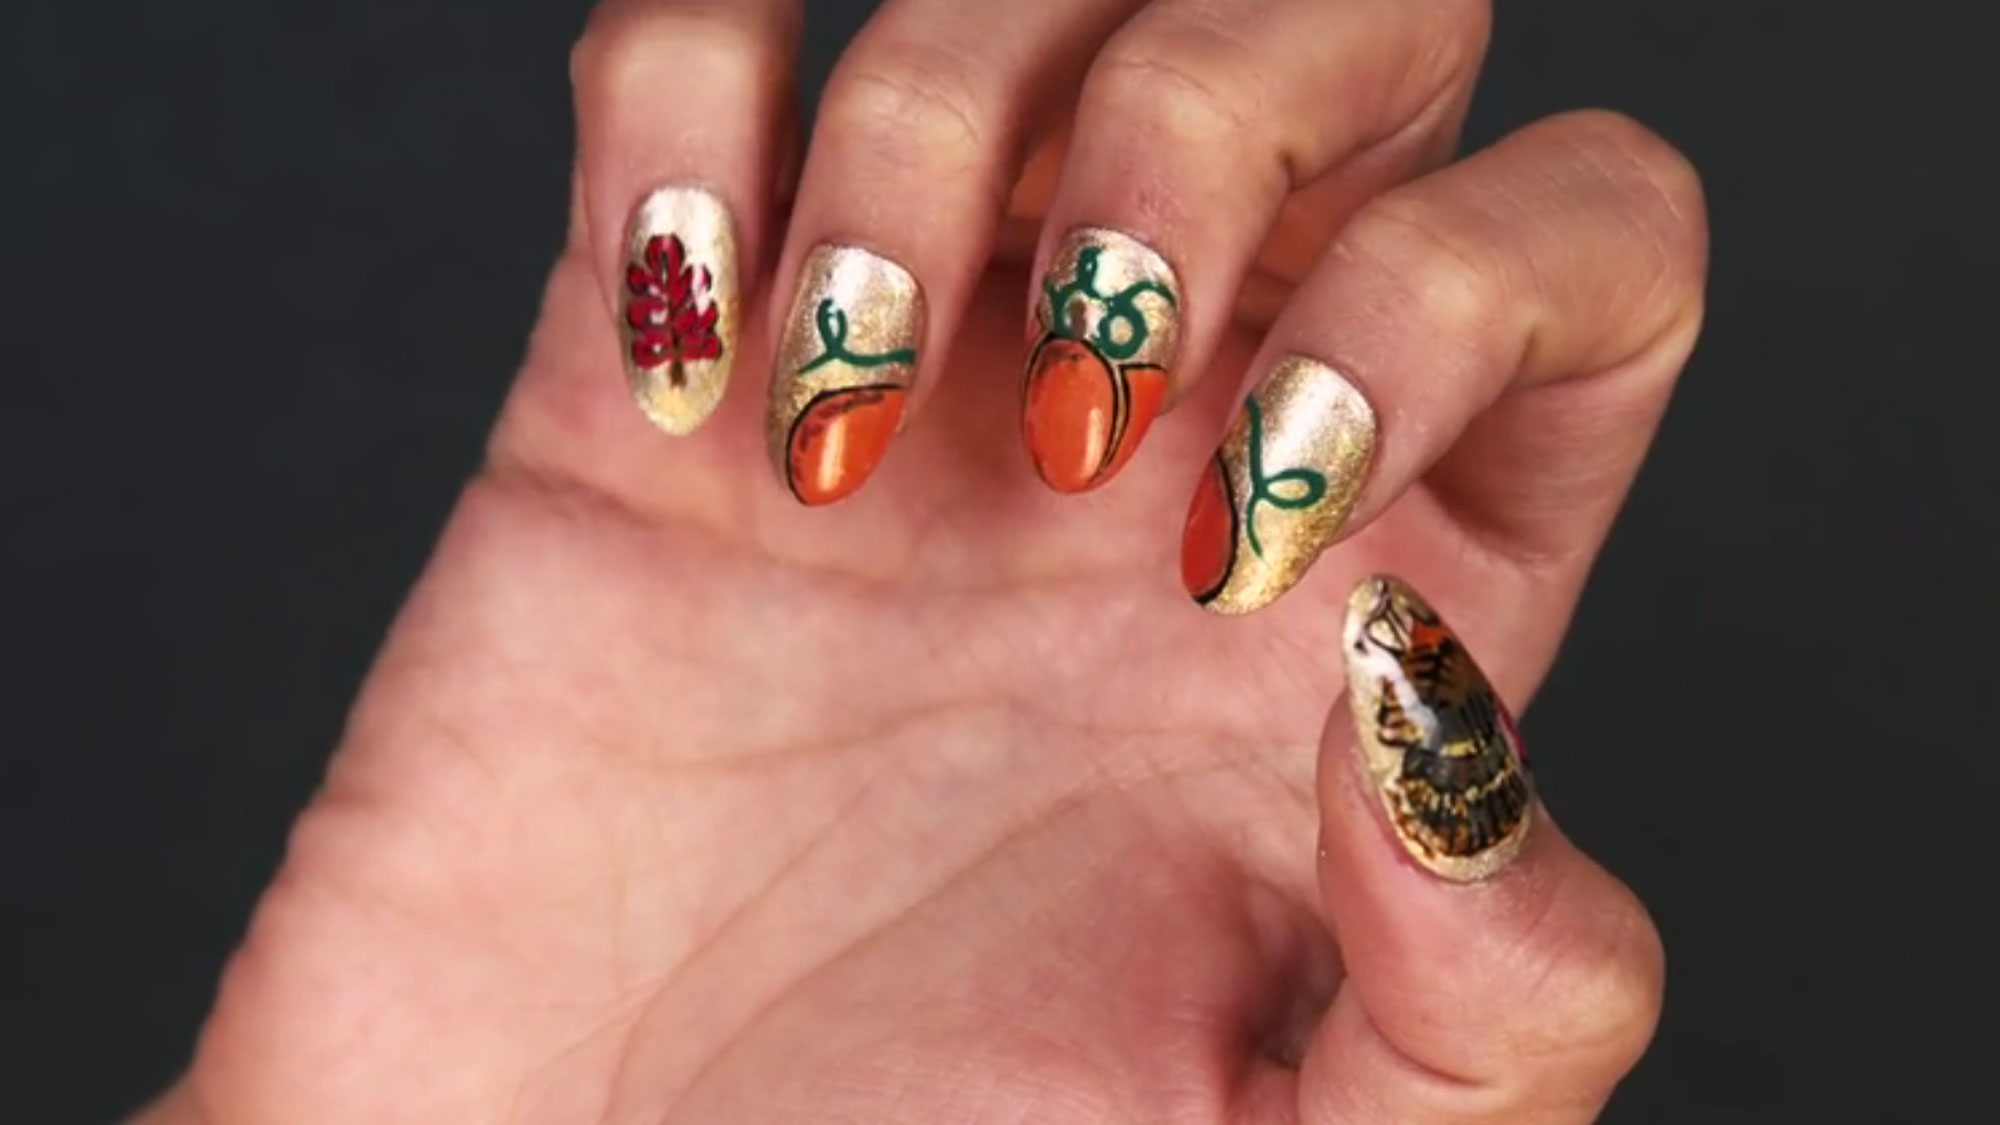 Nails 2016: Latest Nail Art Trends For Fall 2015/ Winter 2016 | Shilpa Ahuja